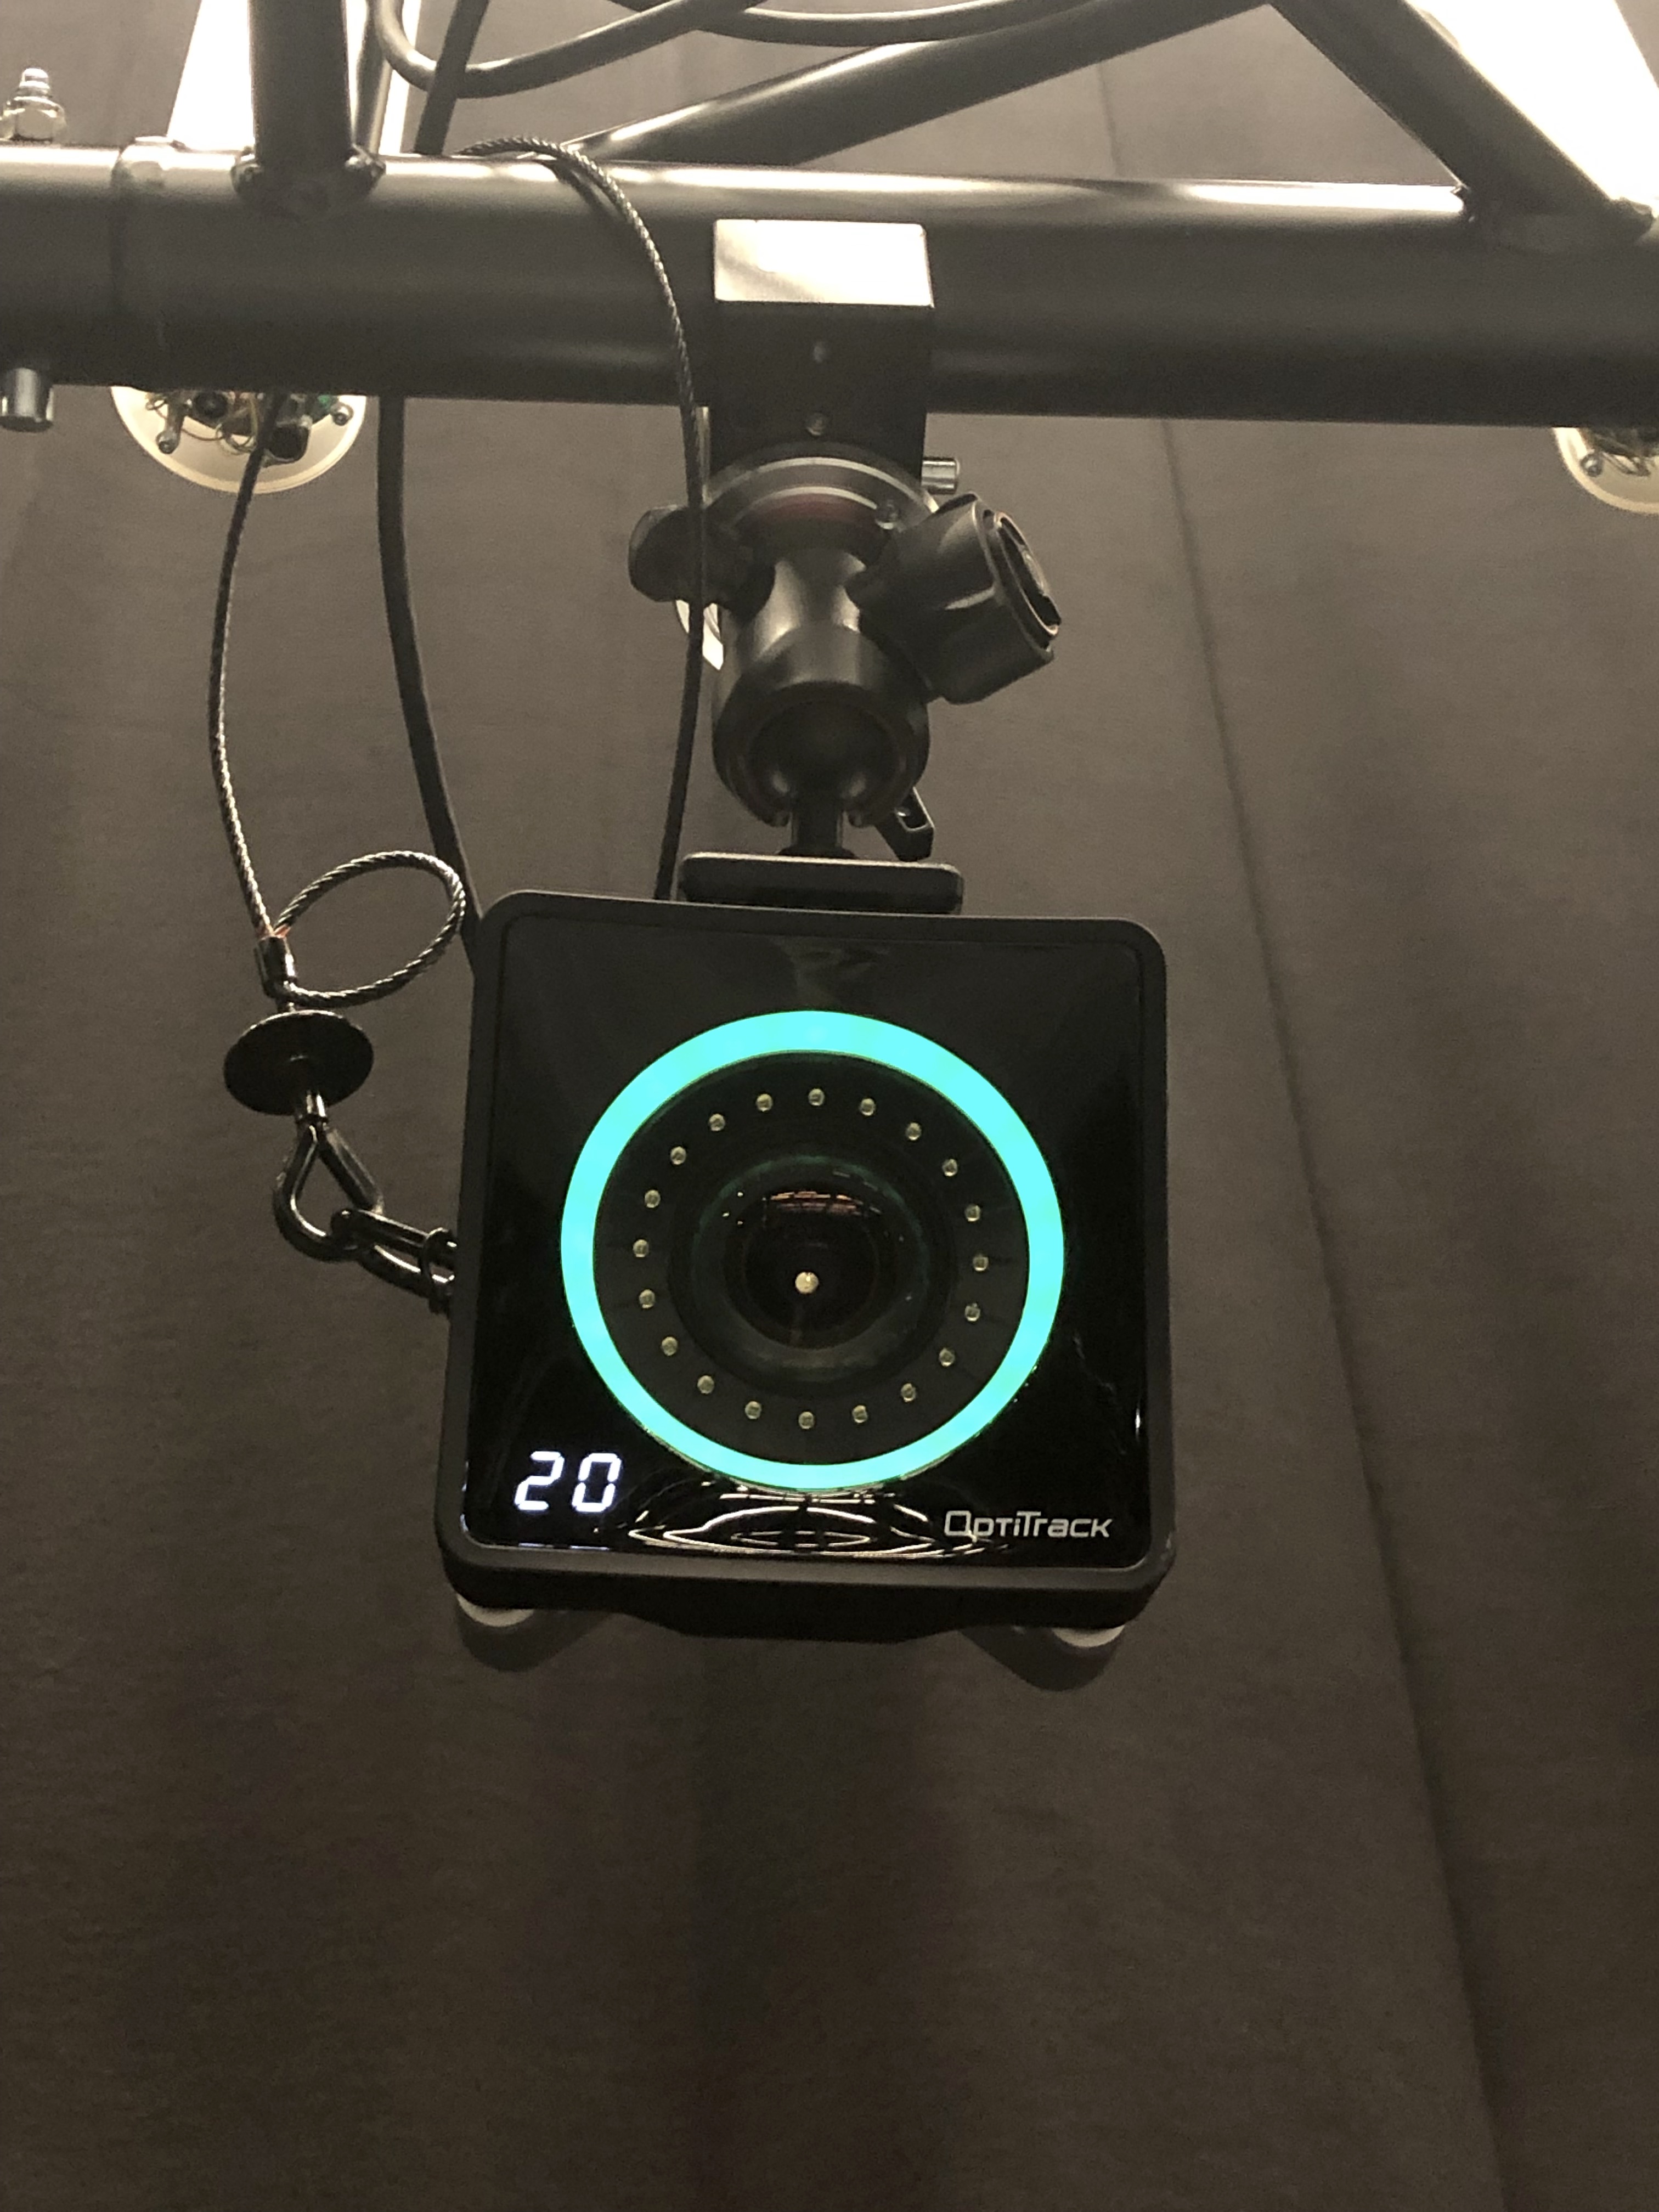  Camera indicating completed wanding with green LED